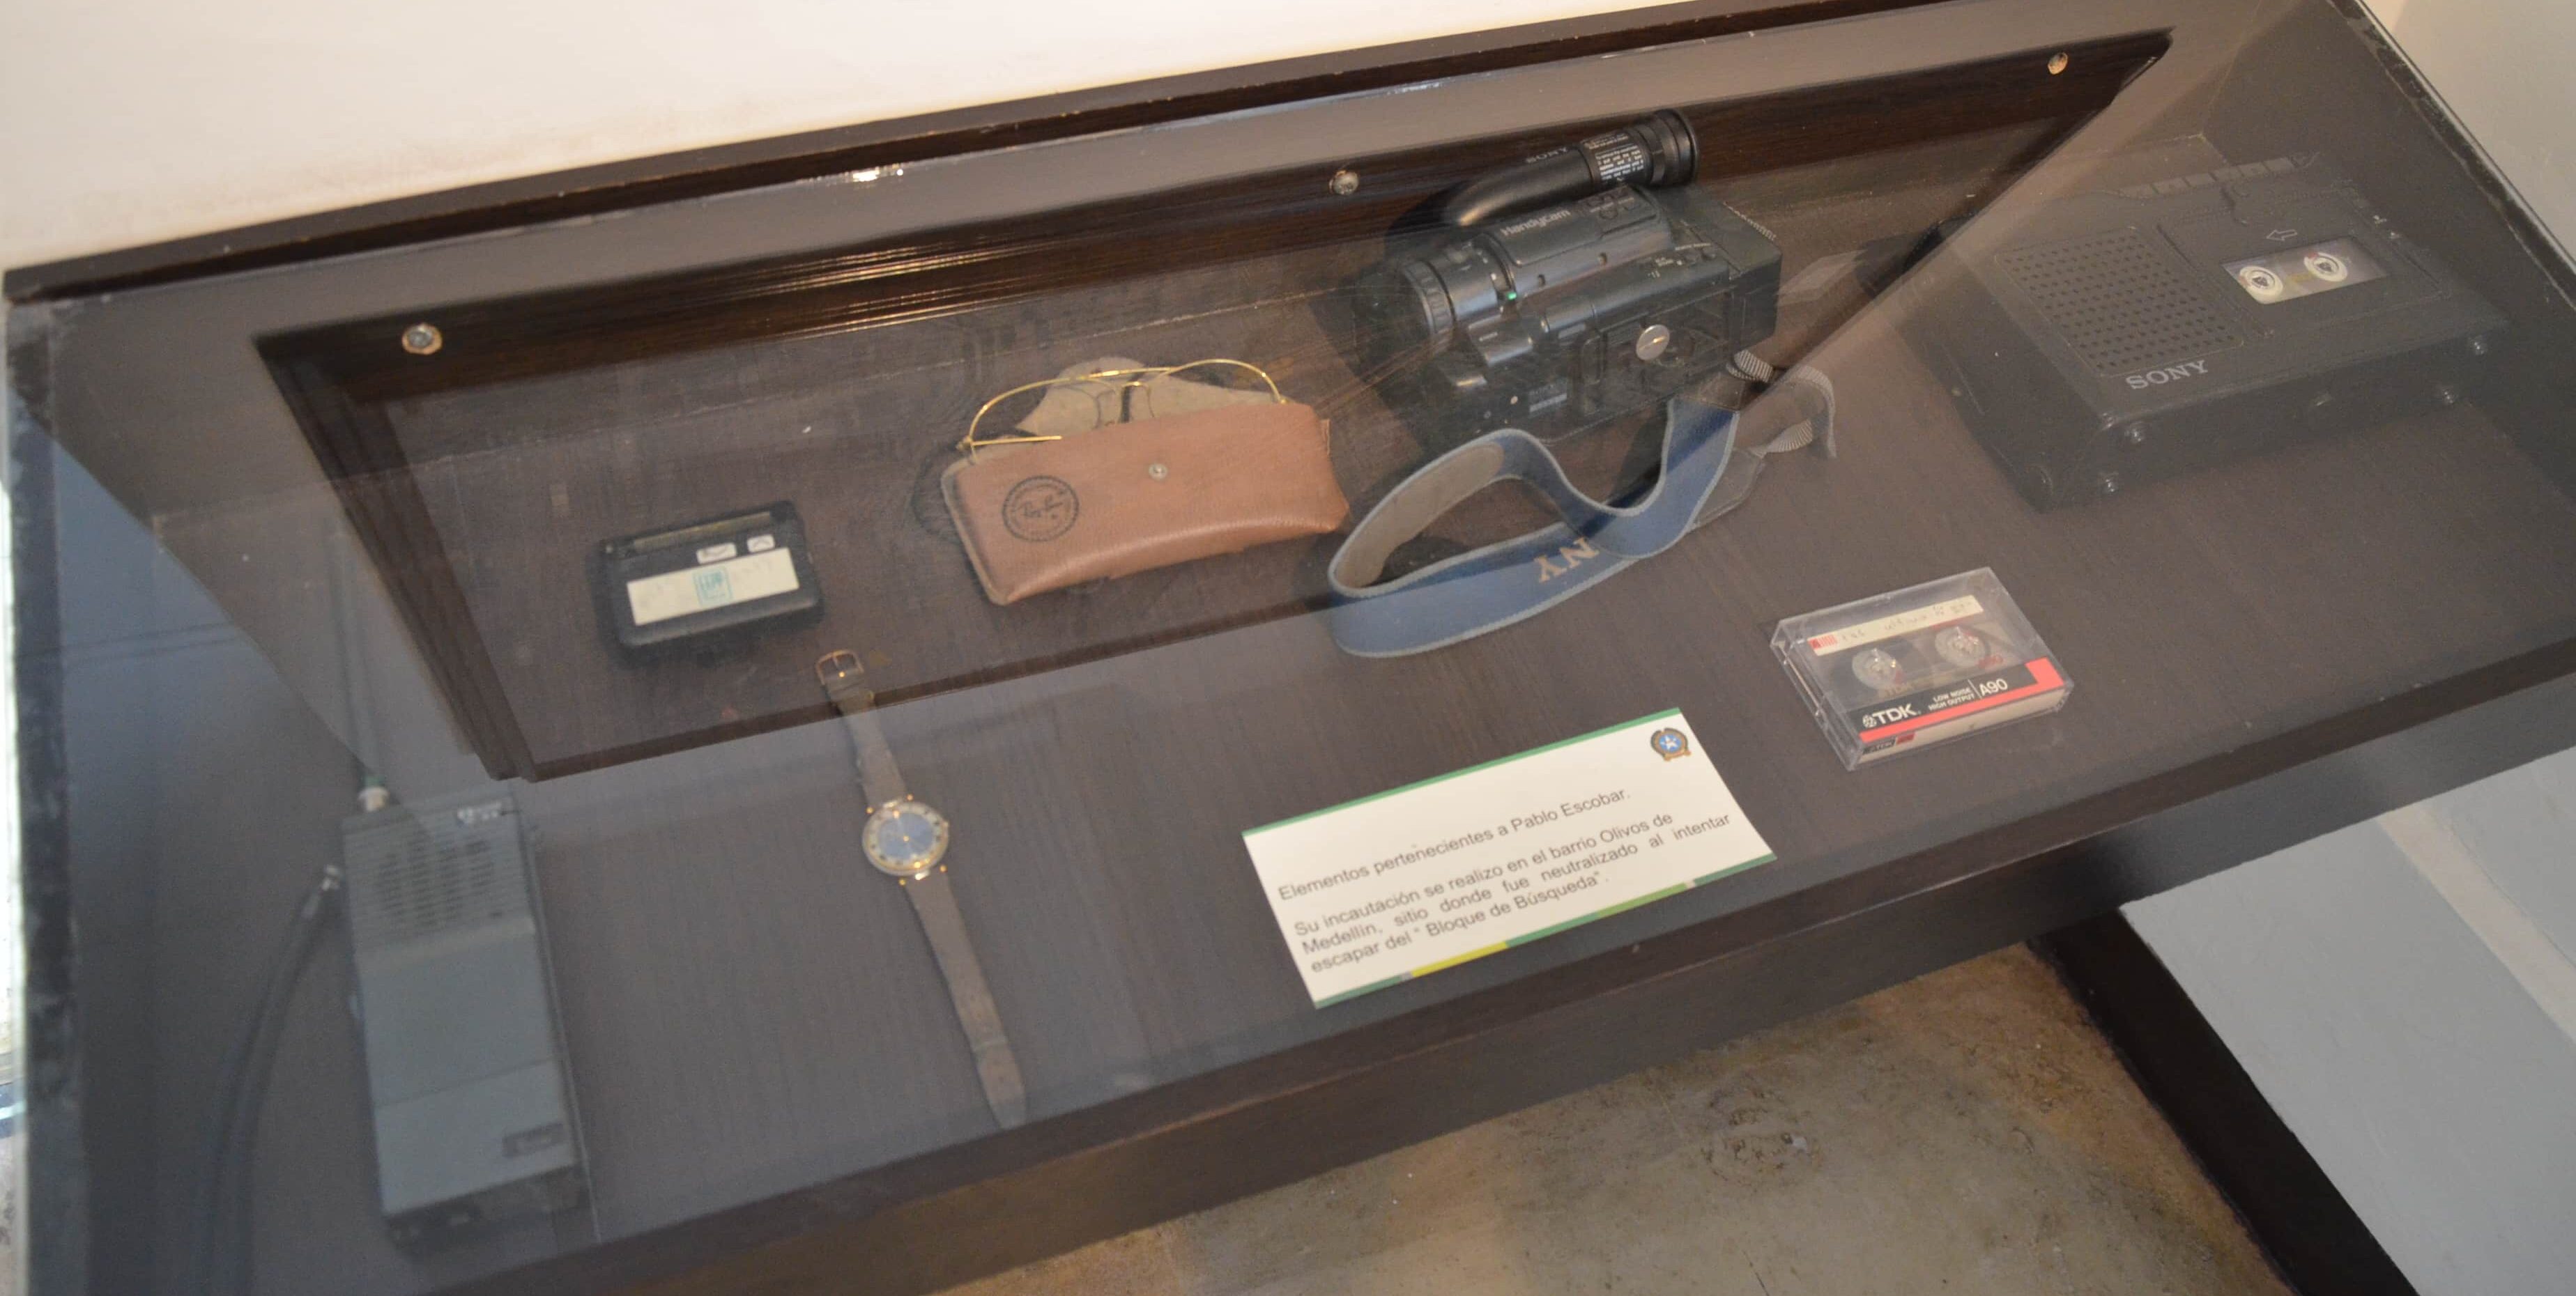 Pablo Escobar's personal items at the National Police History Museum in La Candelaria, Bogotá, Colombia